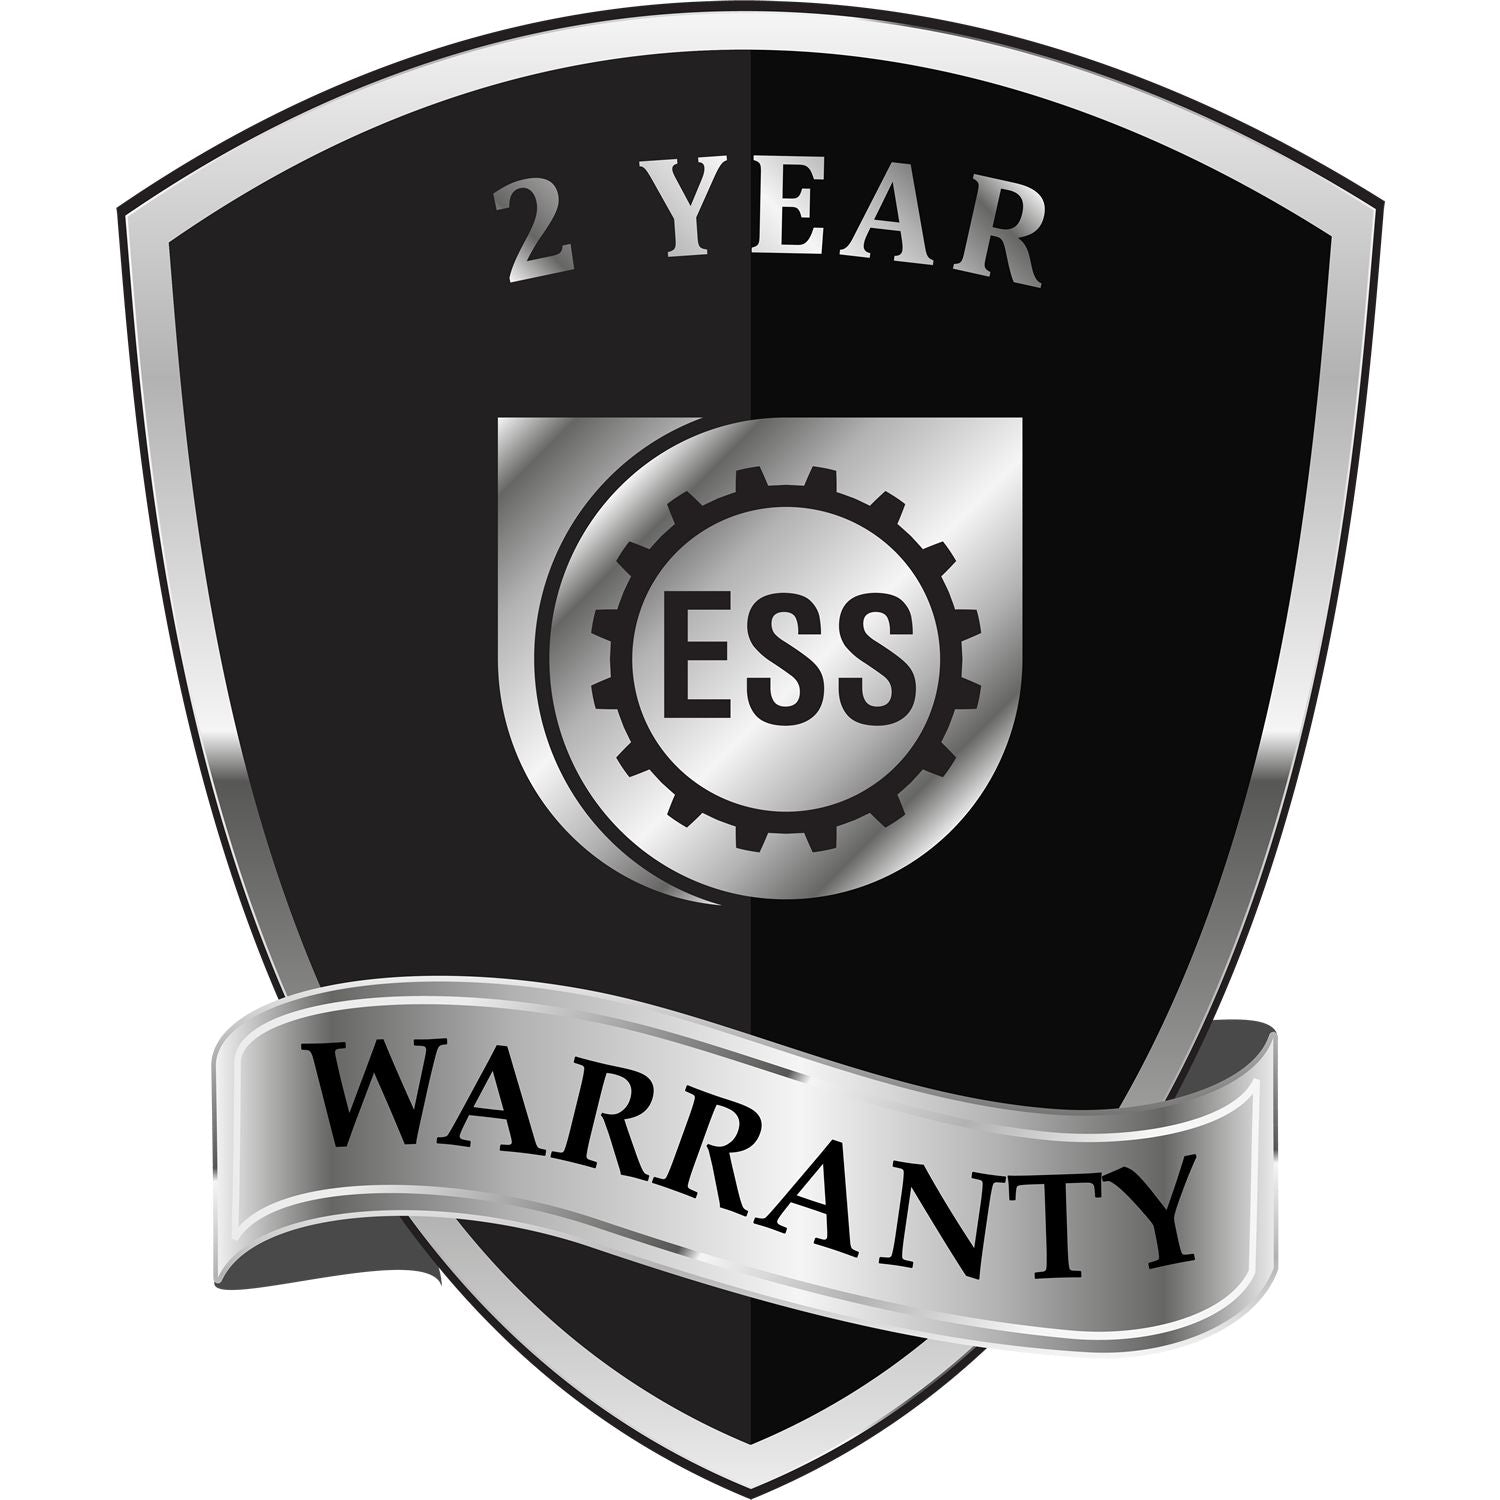 A badge or emblem showing a warranty icon for the Handheld Oklahoma Land Surveyor Seal